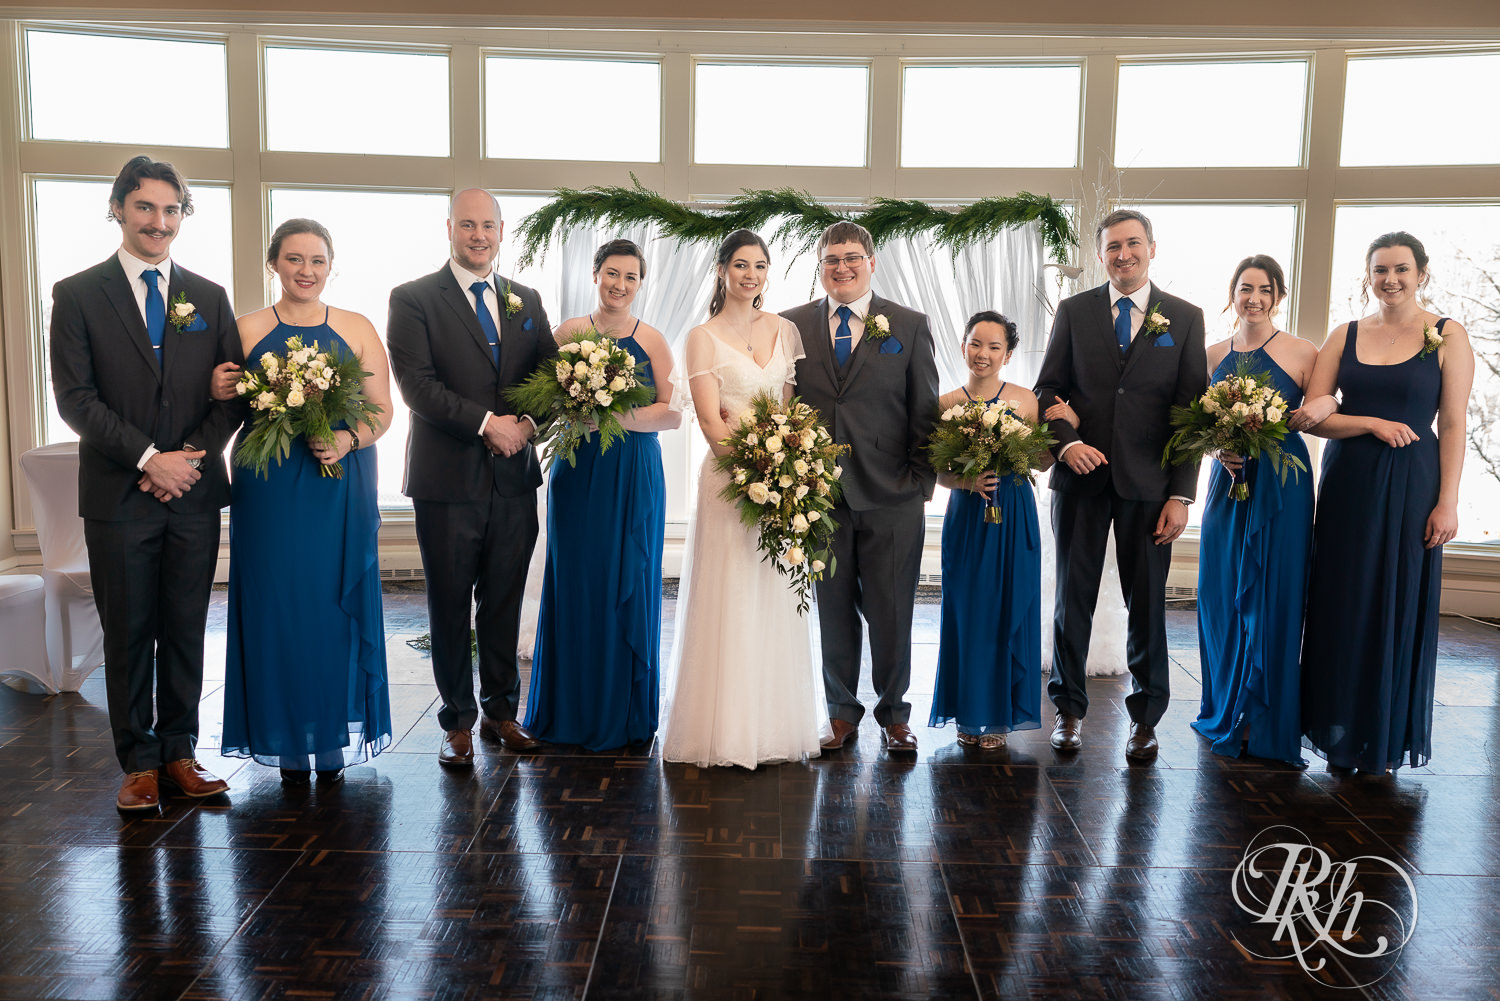 Wedding party in blue dresses and grey suits at Minneapolis Golf Club in Saint Louis Park, Minnesota.